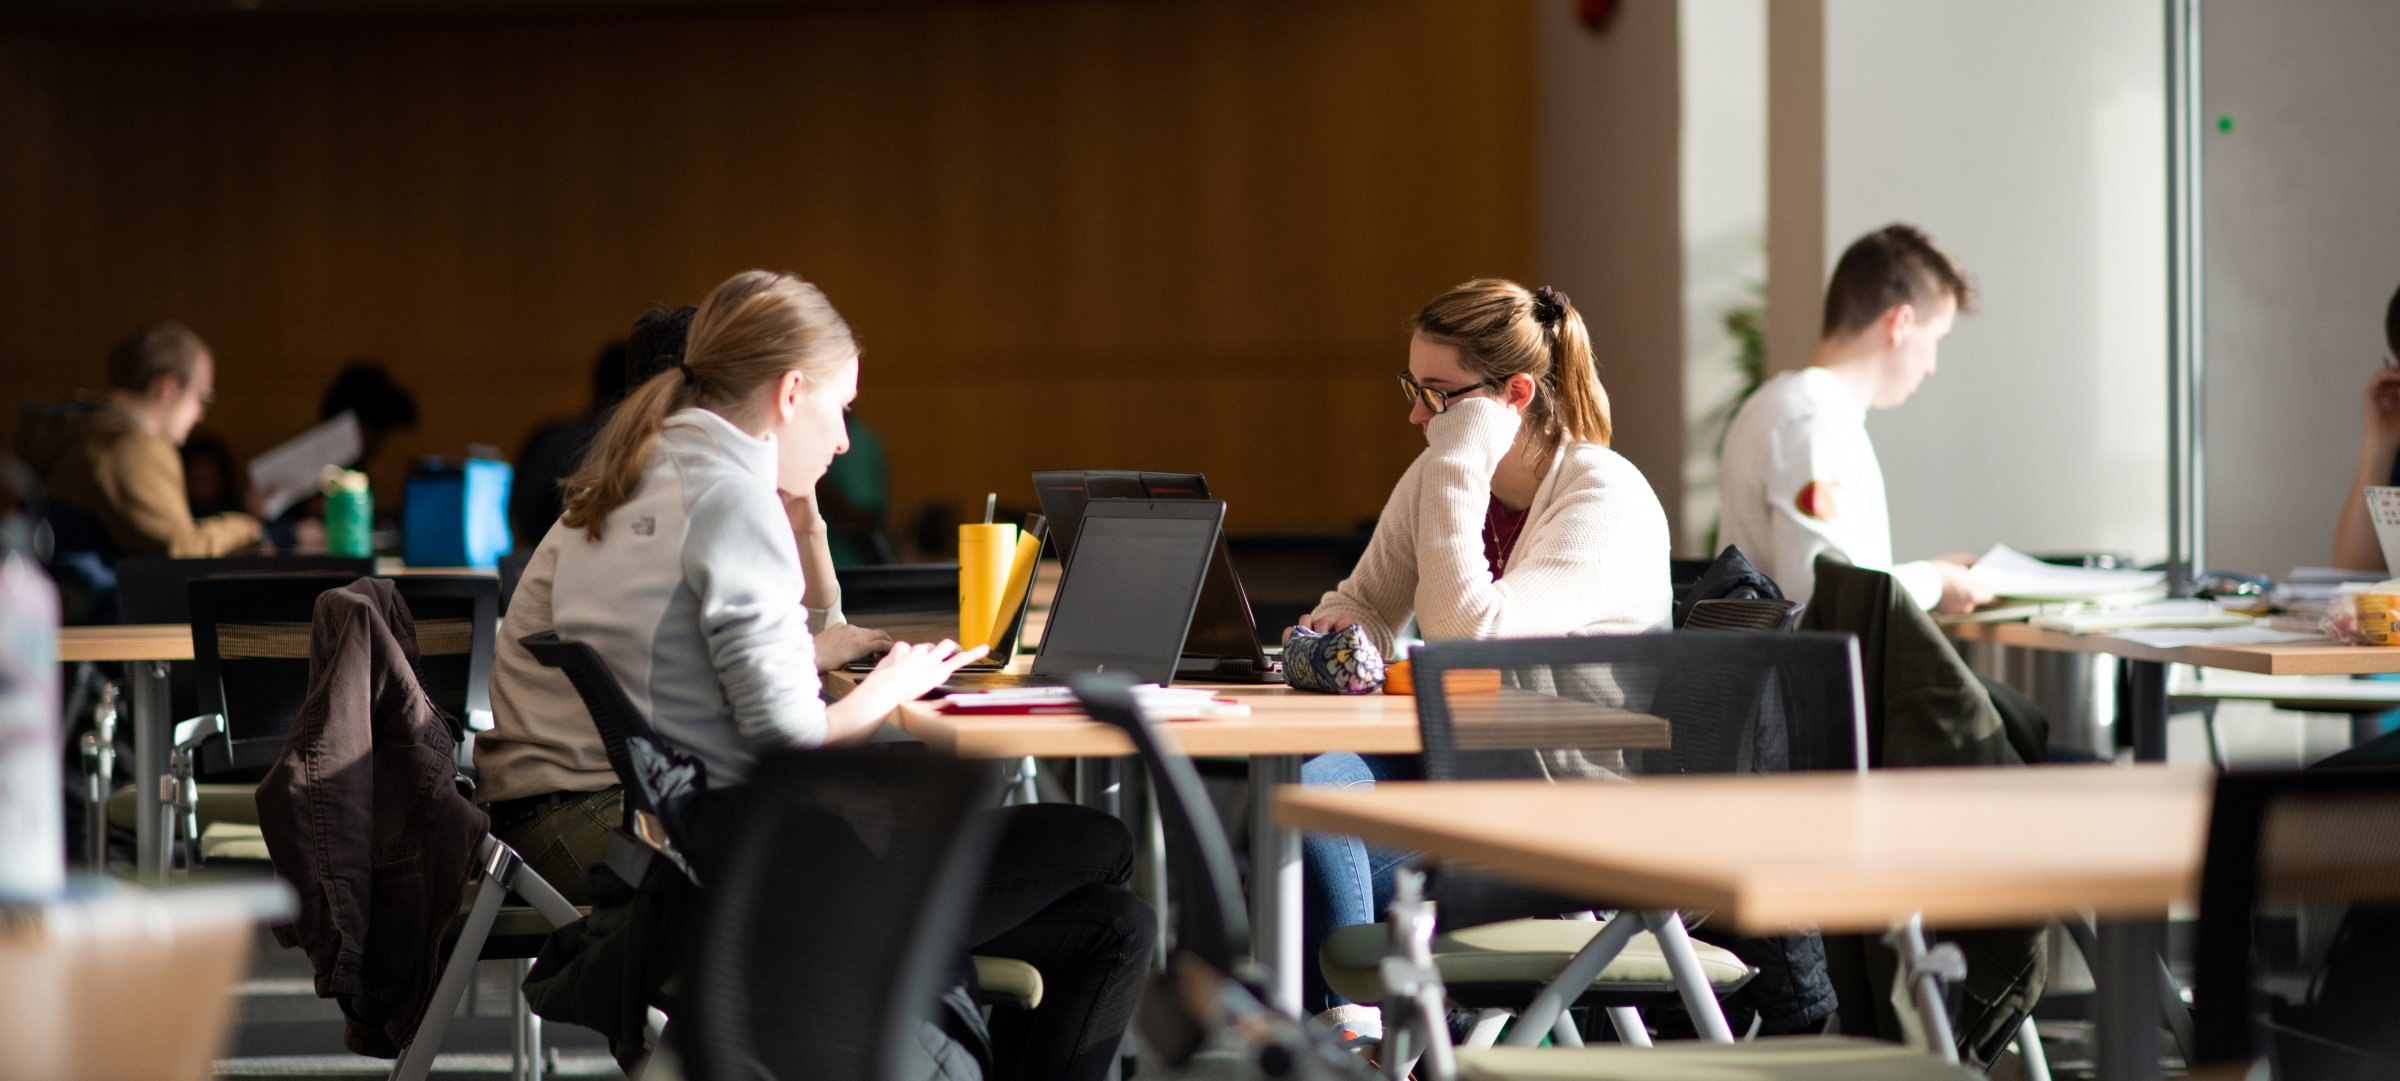 Students in the library studying